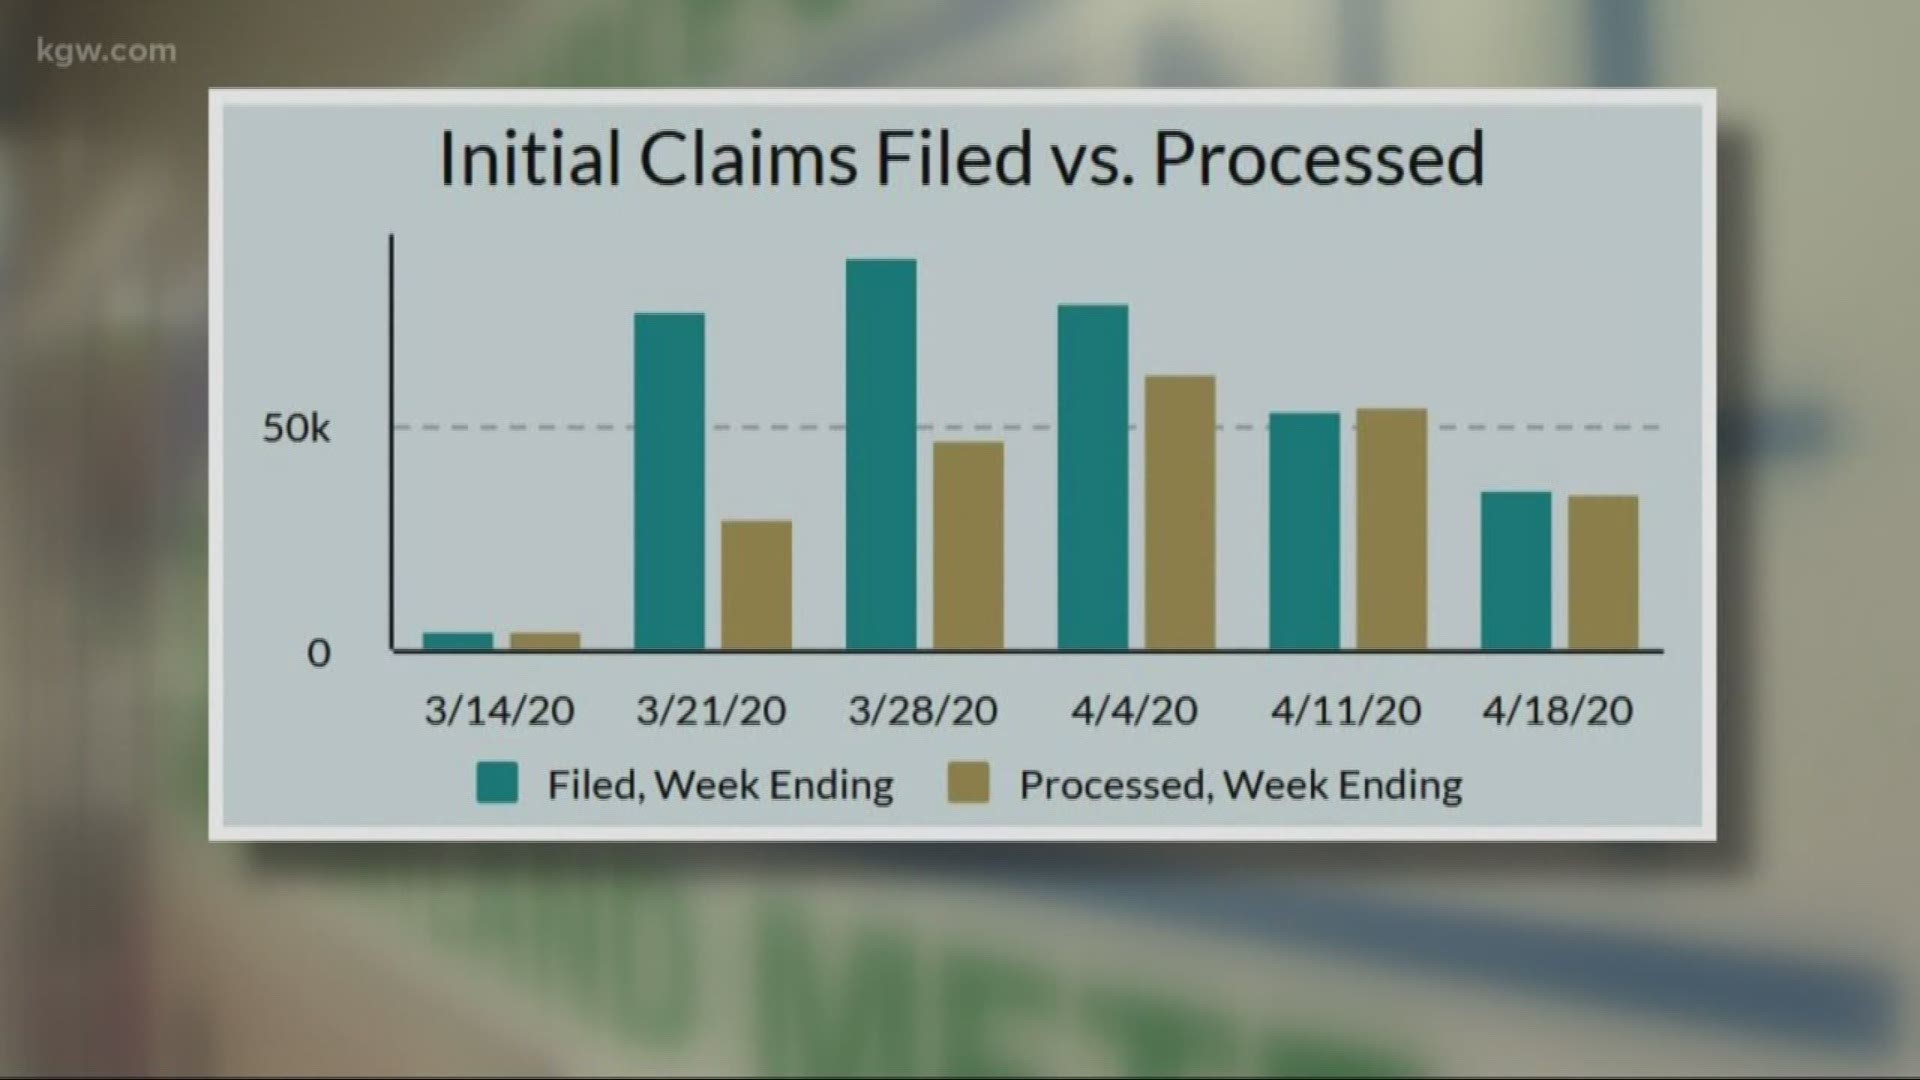 Oregon's system has been overwhelmed but there is progress. It paid out $119 million in the week ending April 18.